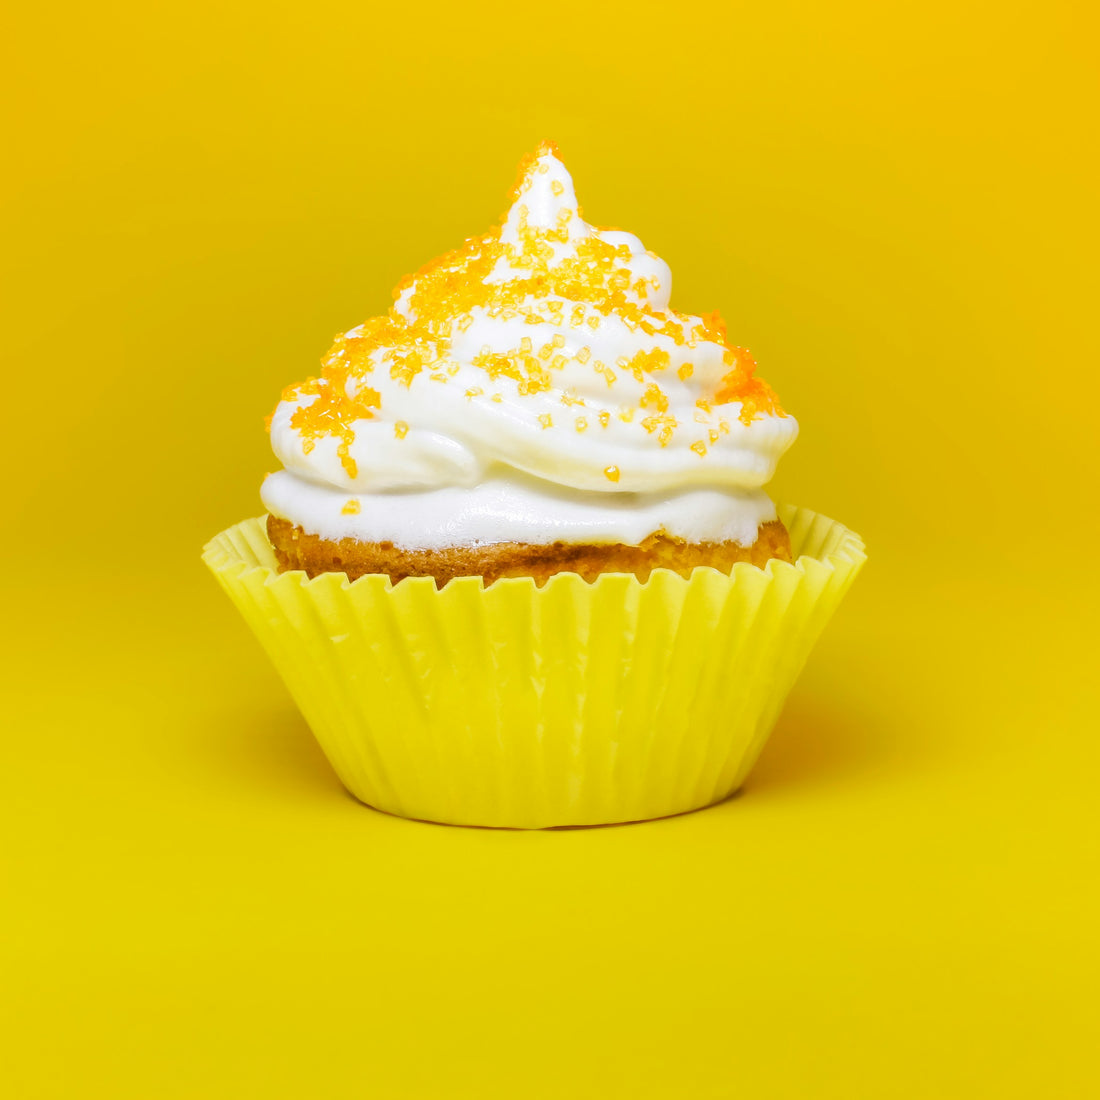 Breaking Free: How A Cup Cake Helped Me Set Boundaries and Rediscover Myself